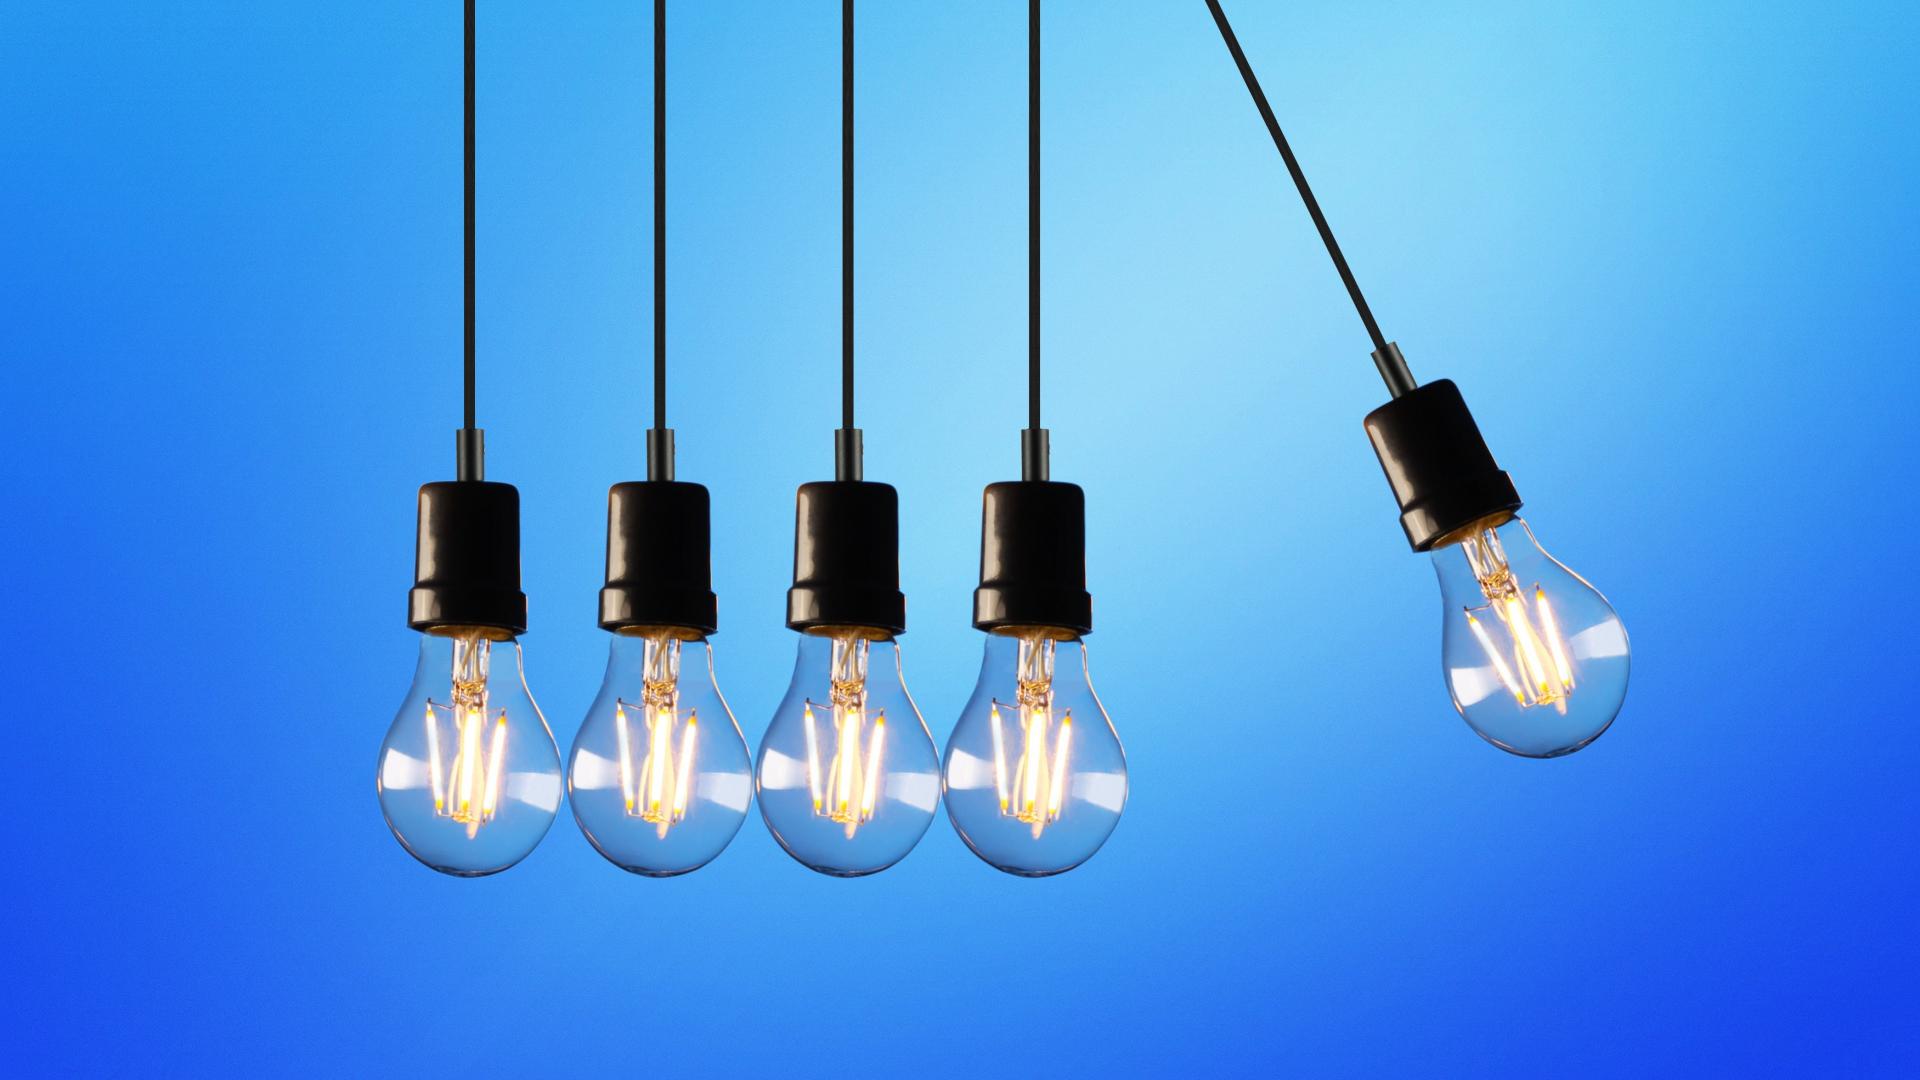 Five light bulbs hanging with one moving